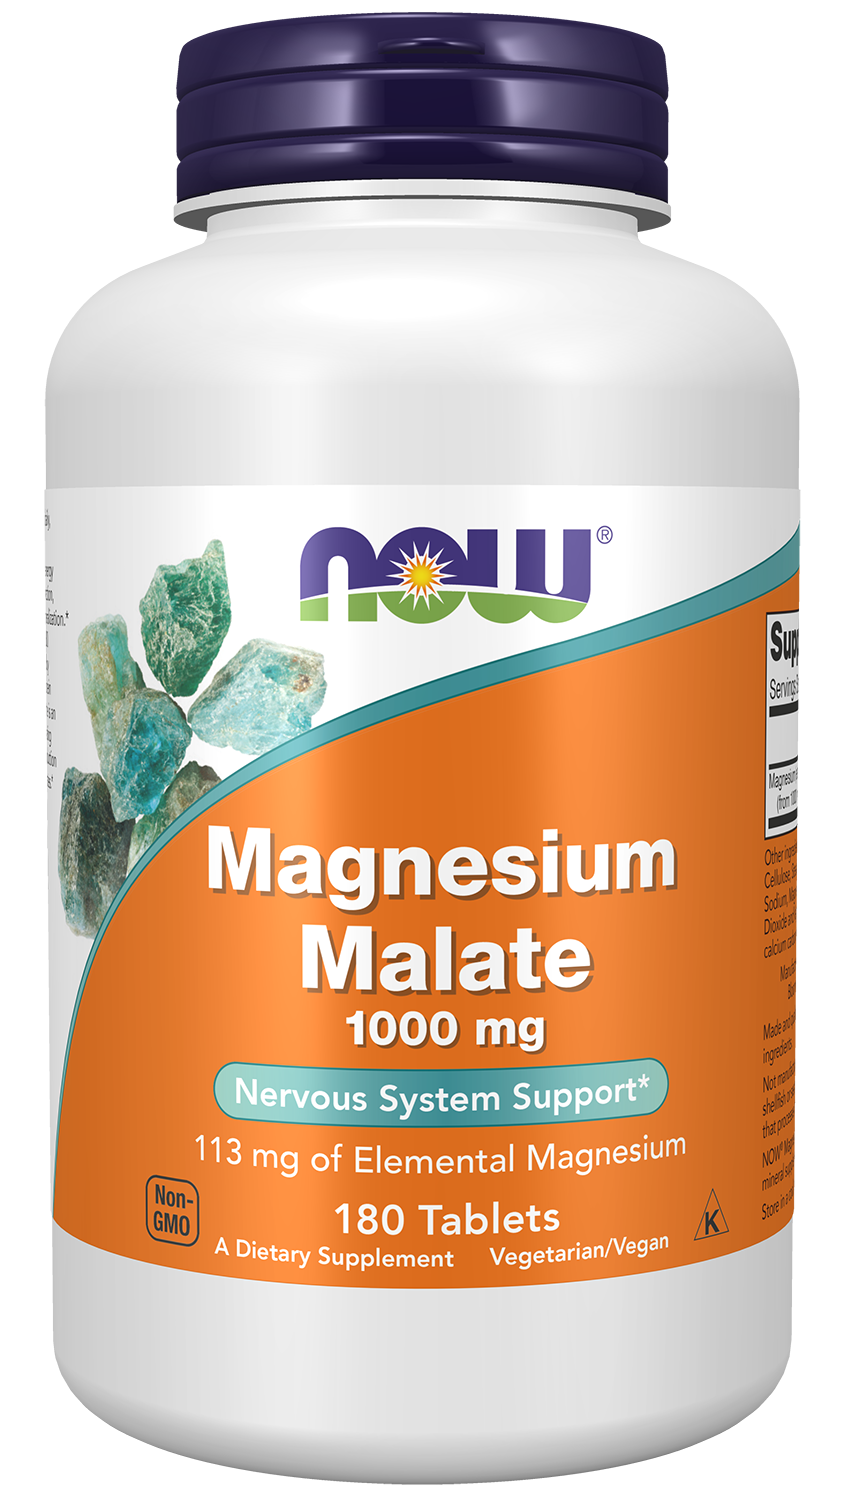 Magnesium Malate 1000 mg - 180 Tablets Bottle Front